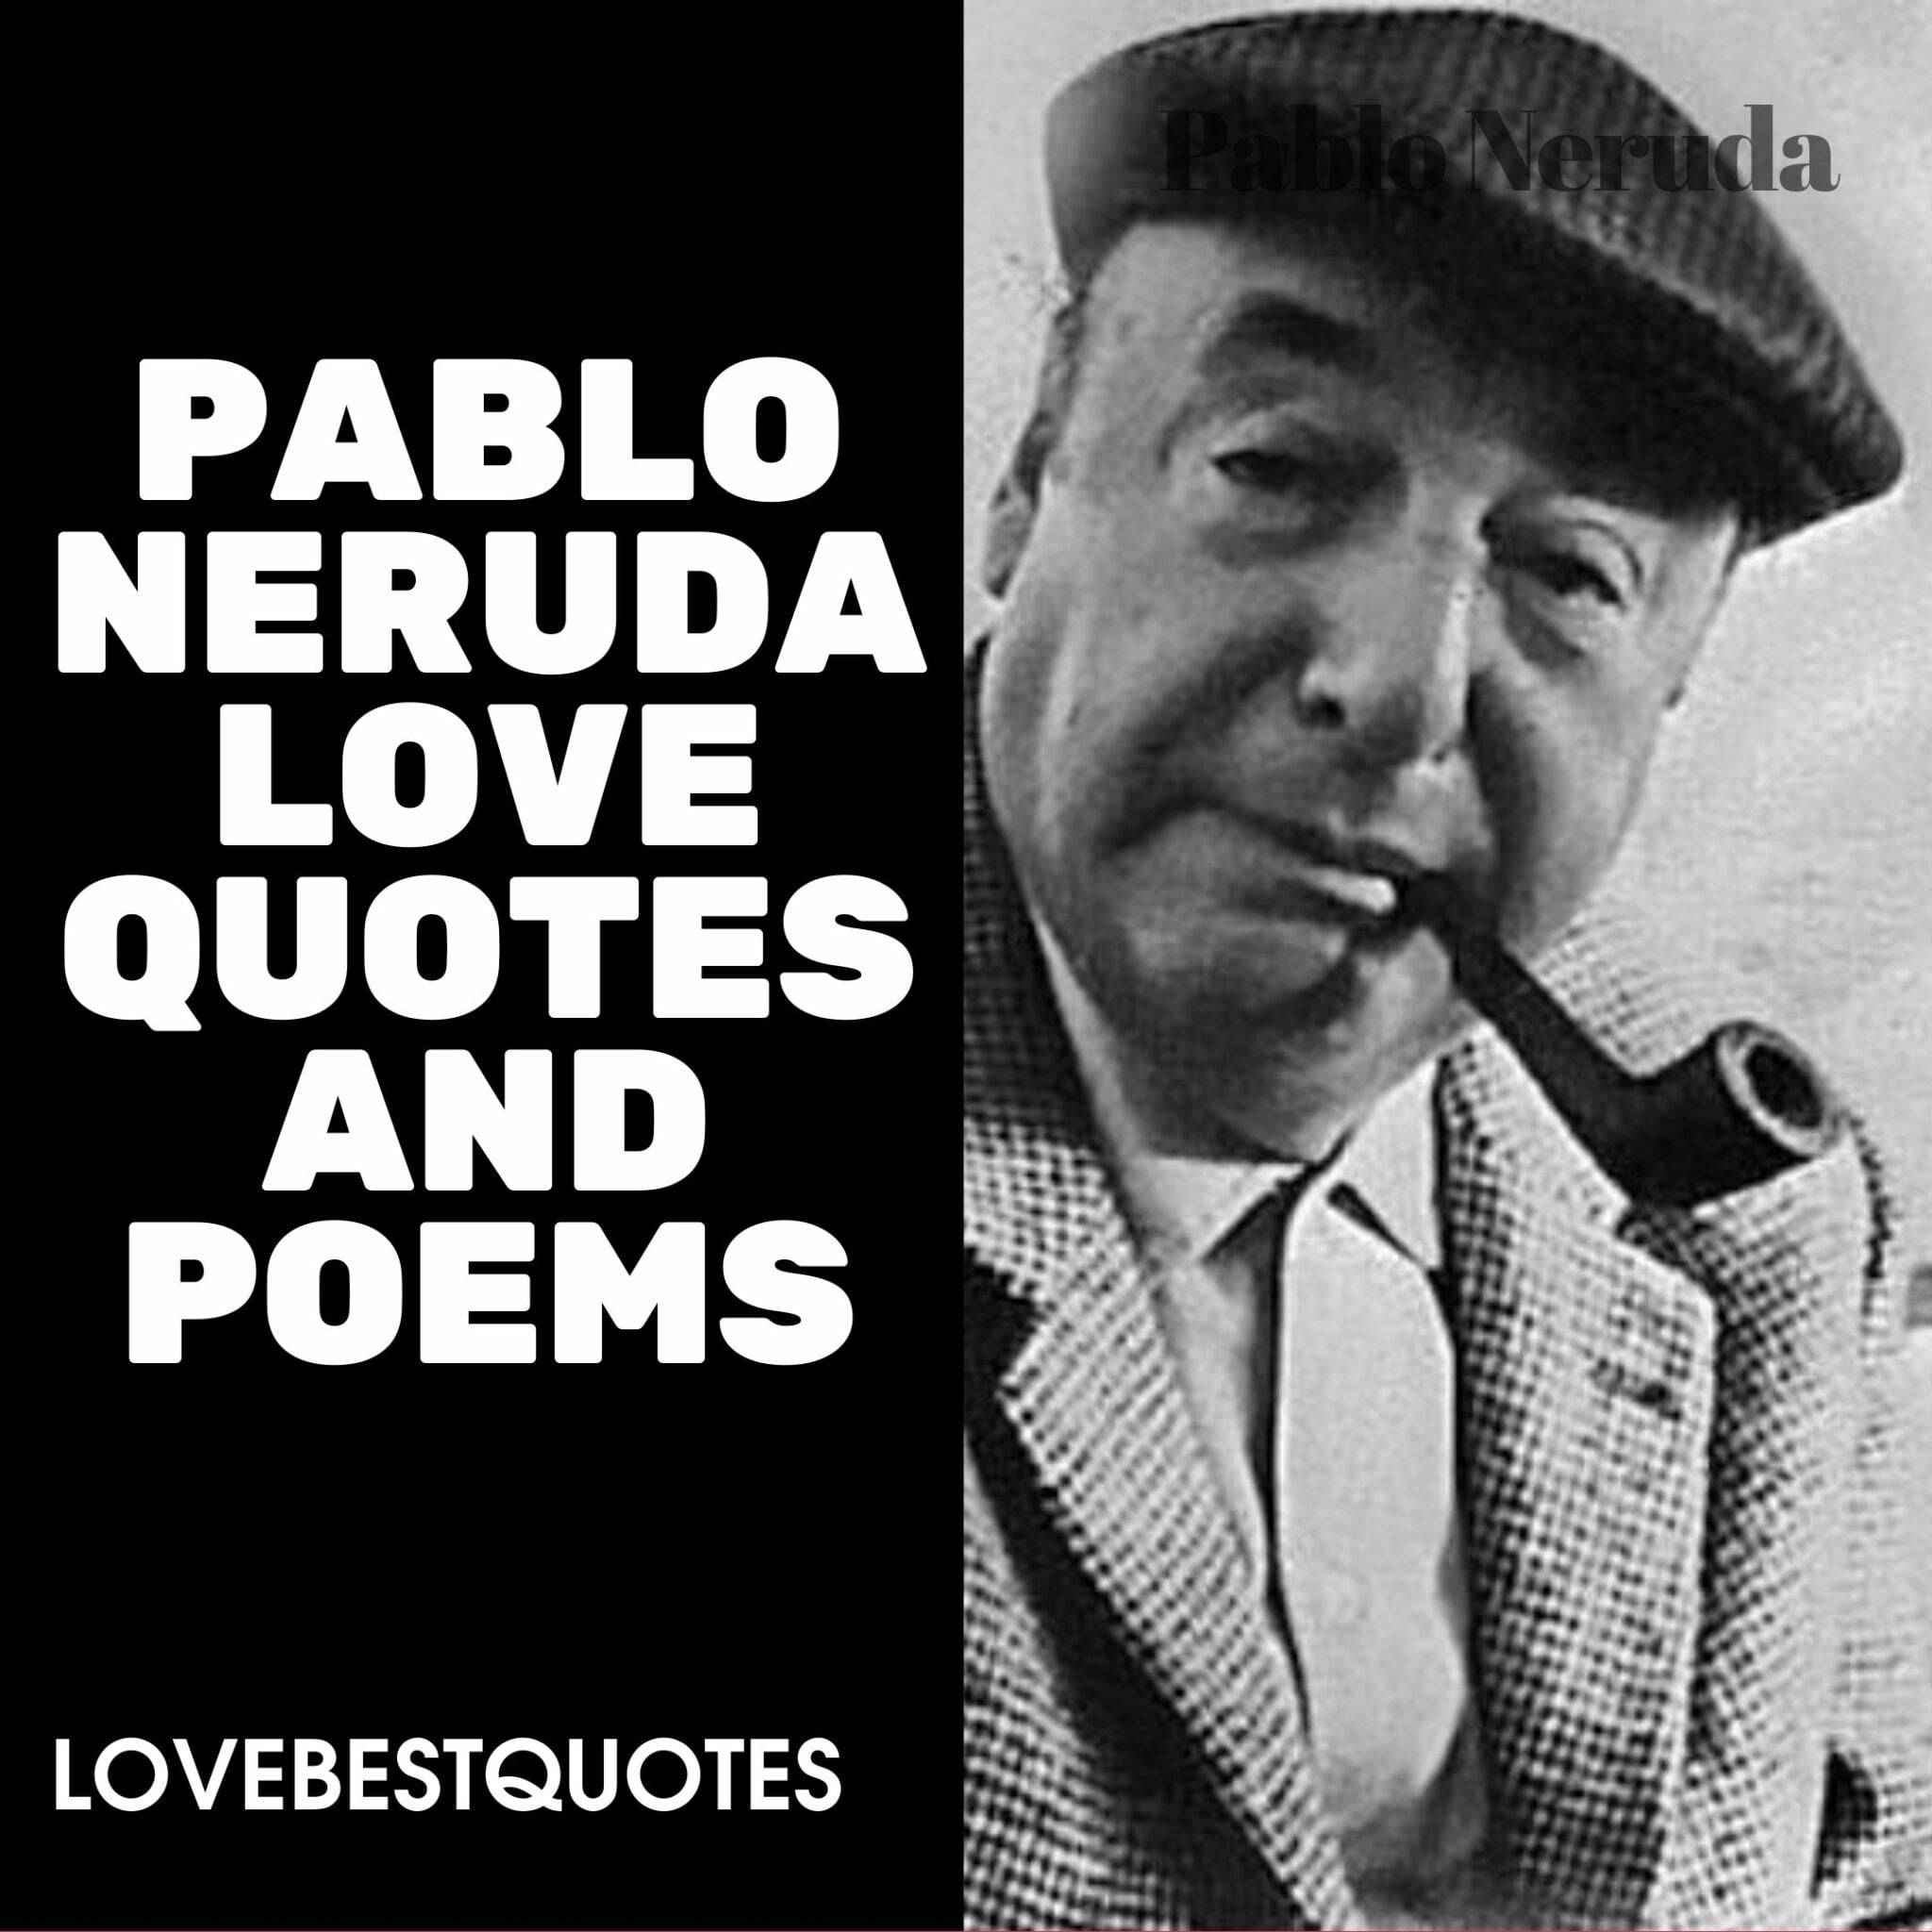 Pablo Neruda Love Quotes and Poems